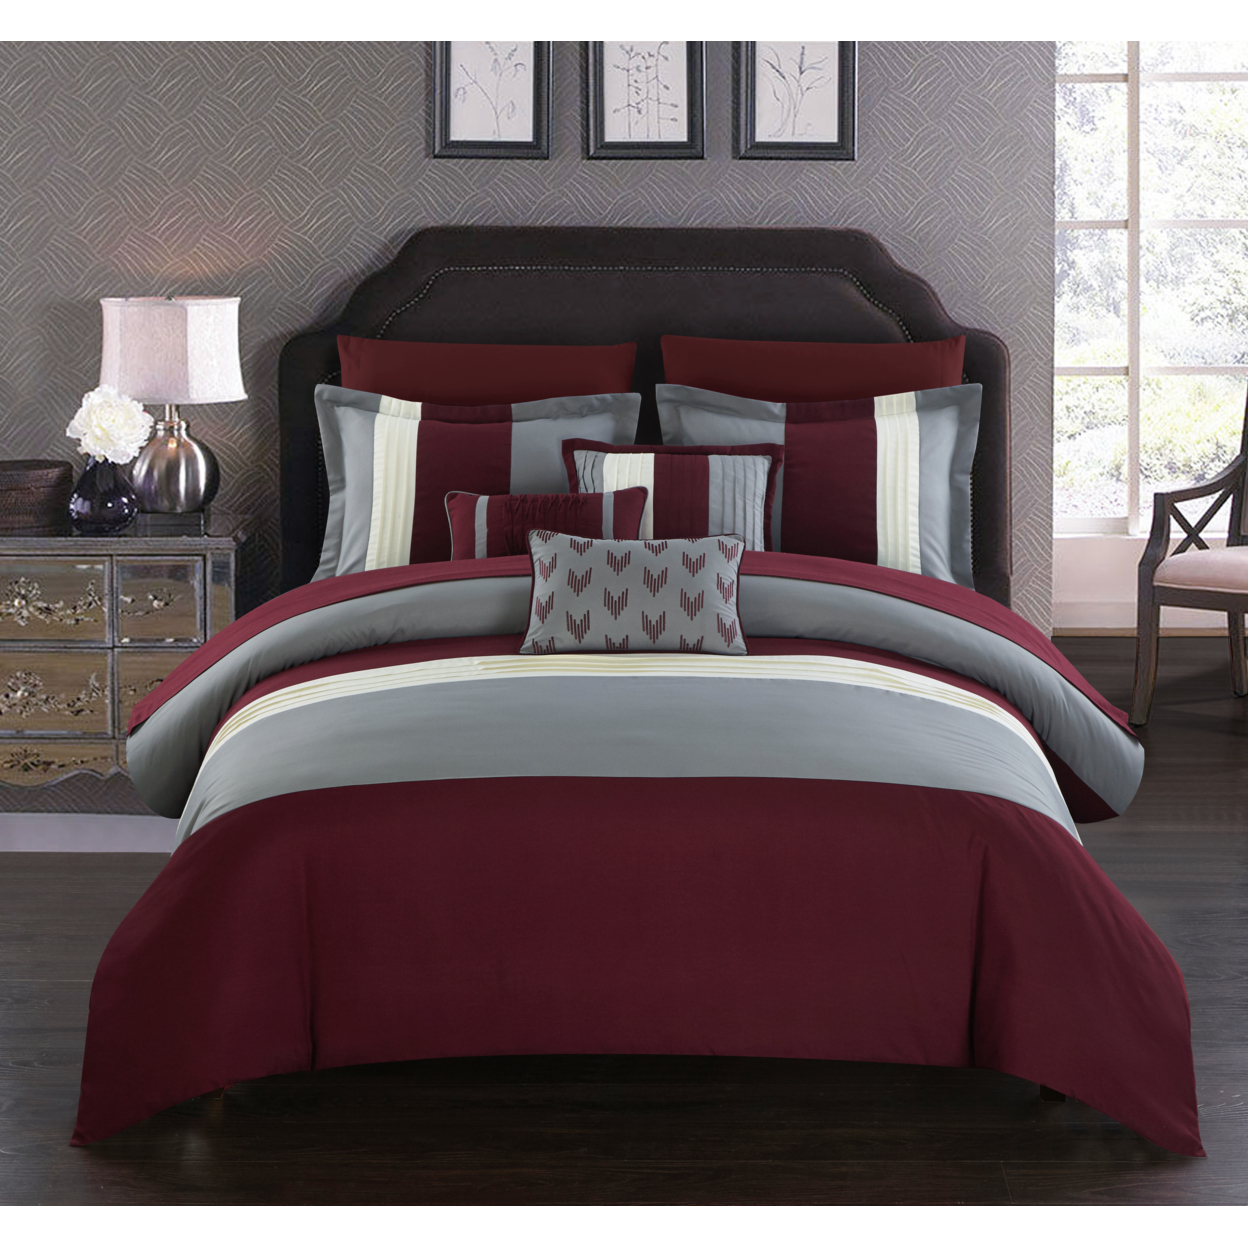 Rashi 10 Or 8 Piece Color Block Bed In A Bag Bedding And Comforter Set - Burgundy, Queen